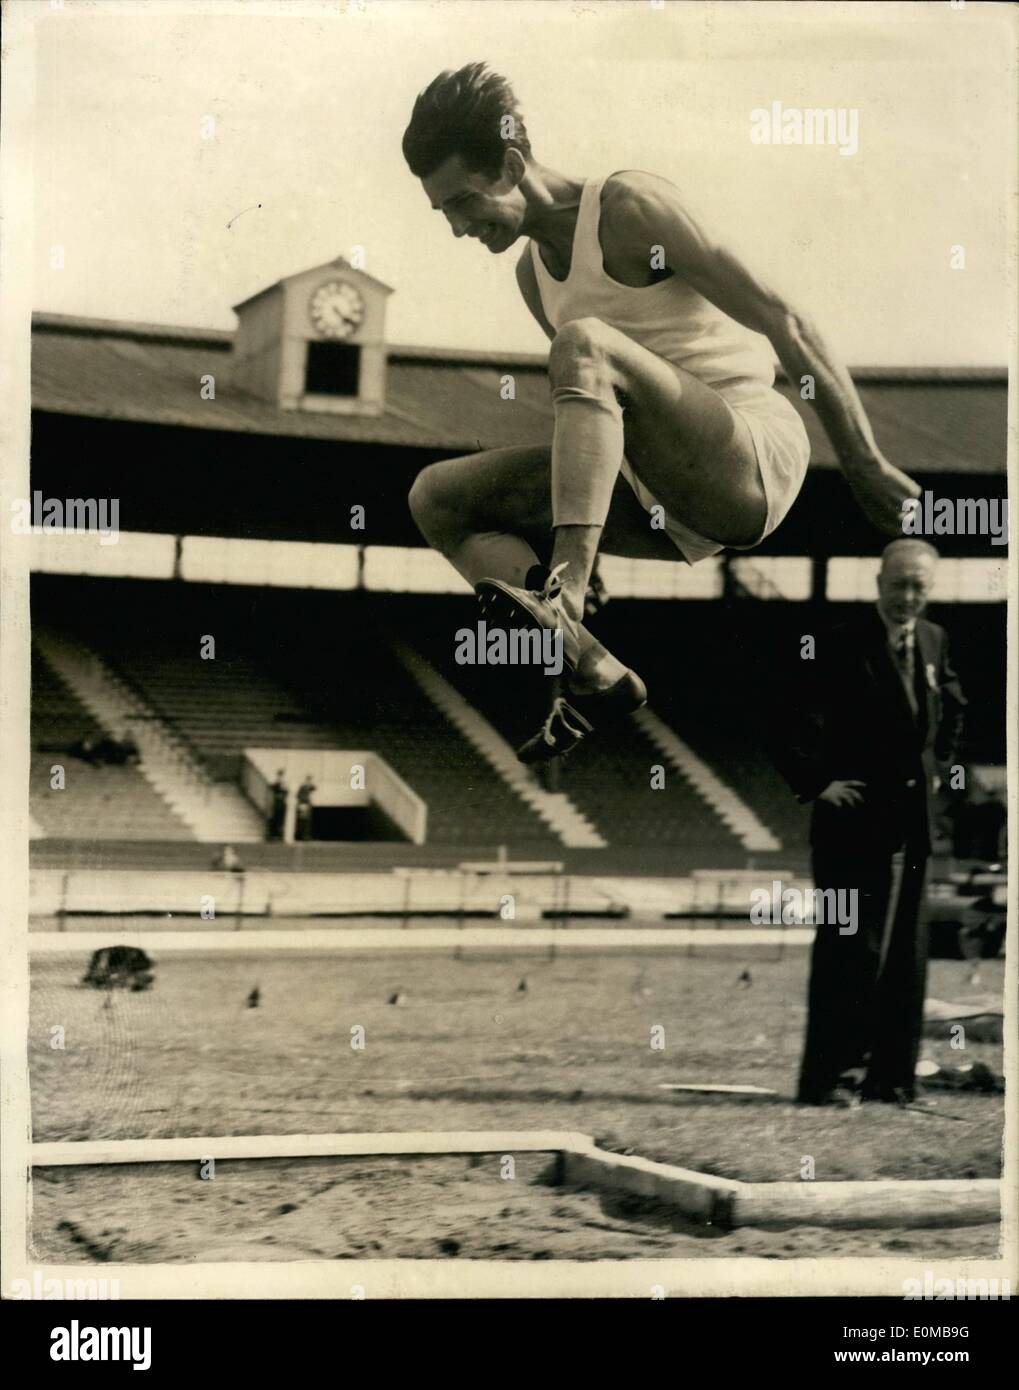 Jul. 09, 1954 - 9-7-54 Opening of the A.A.A. Championships. Hungarian in long-jump event. Keystone Photo Shows: O. Foldesi of Hungay seen taking part in the Long-Jump event during the A.A.A. Championships at White City this afternoon. Stock Photo